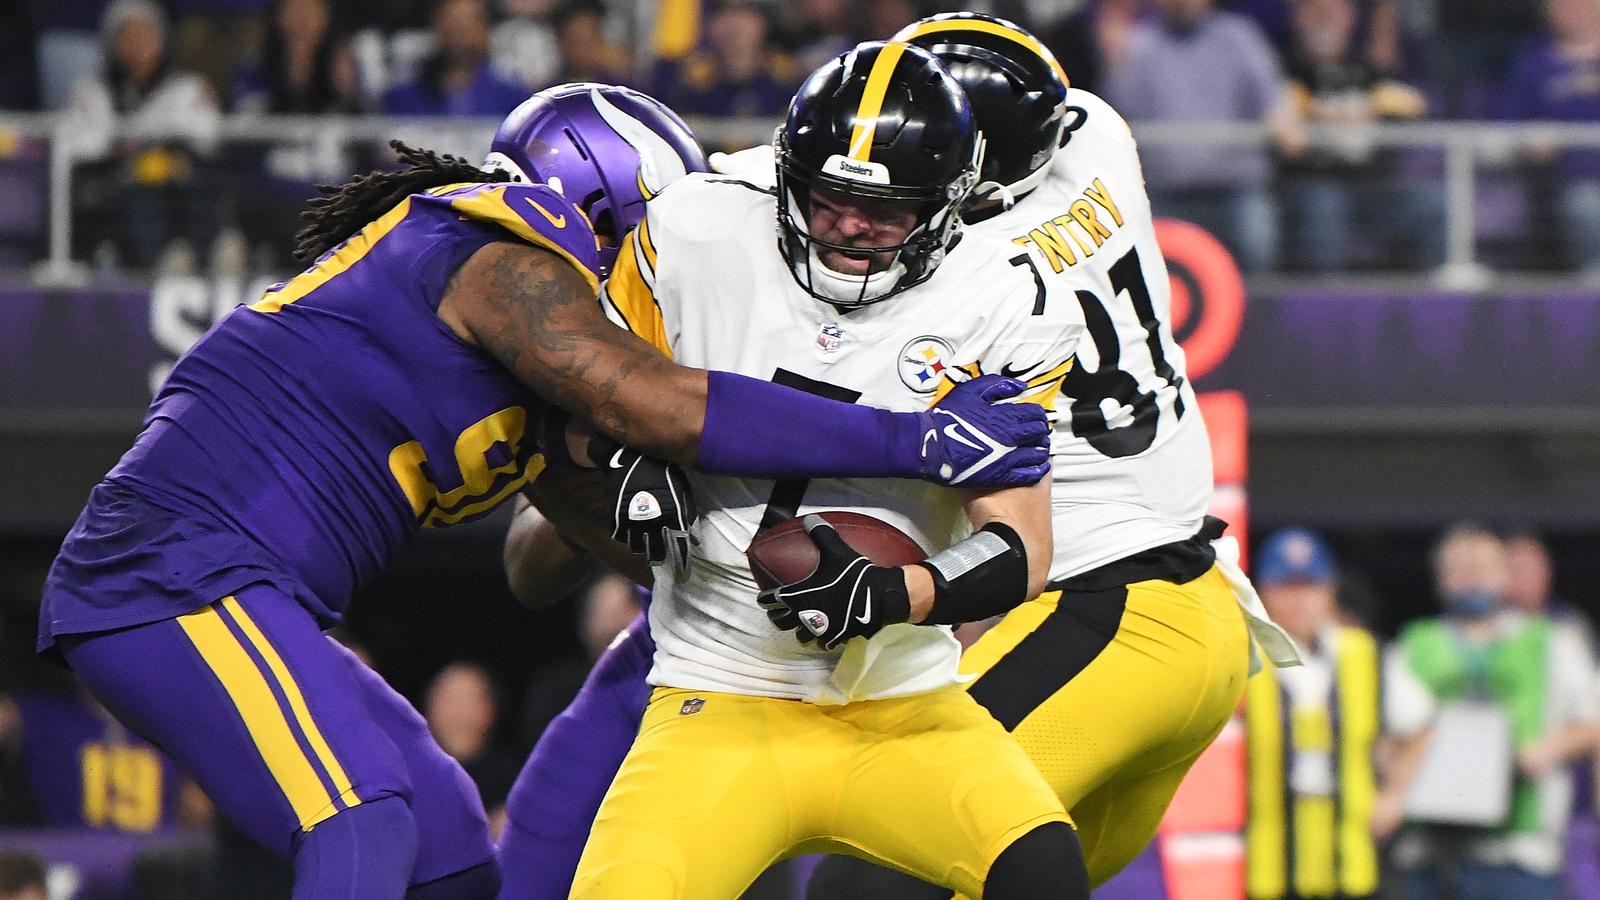 NFL: Steelers fall short of remarkable comeback